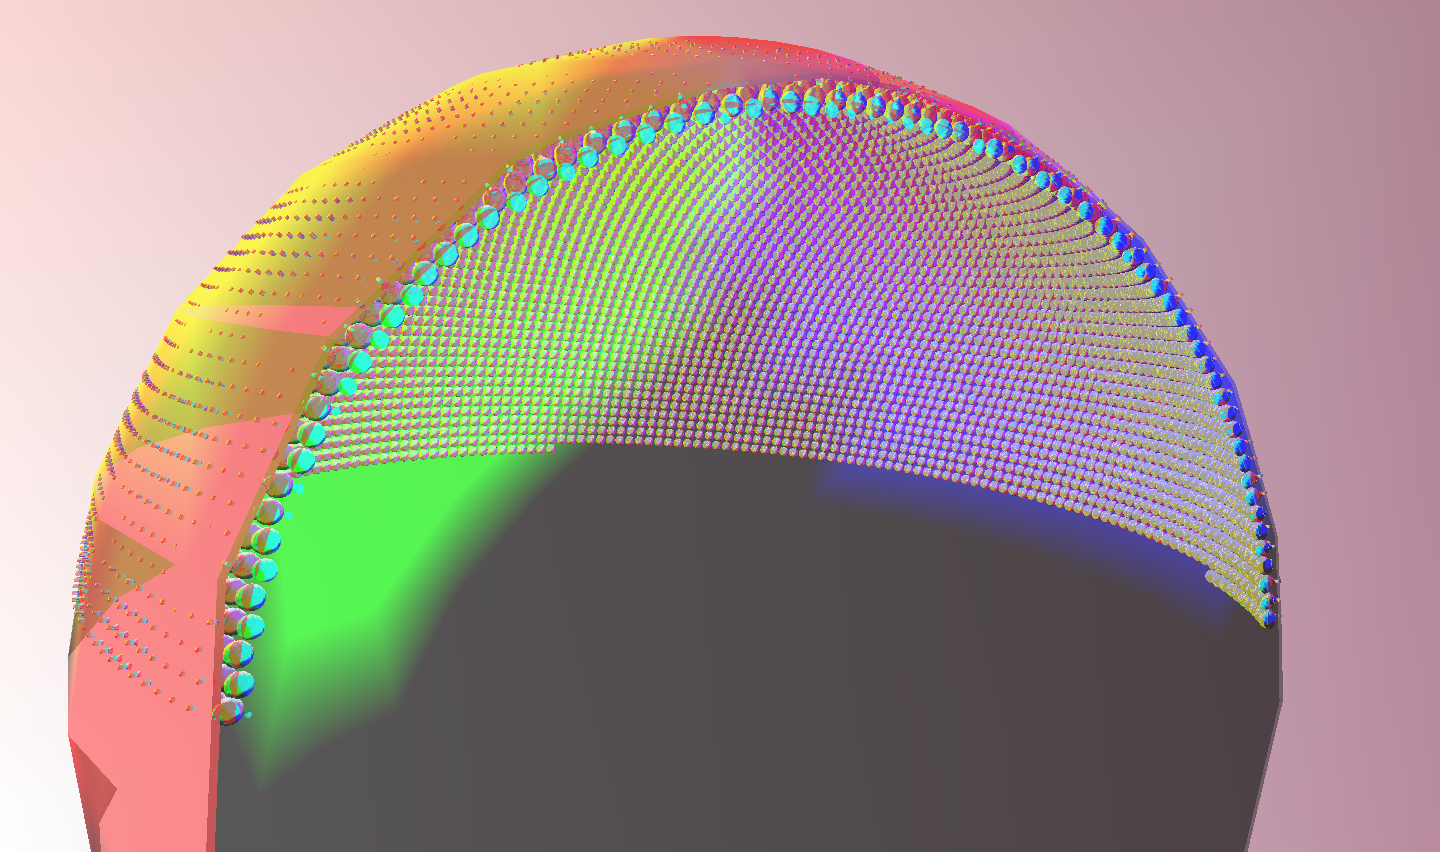 /env/geant4/geometry/collada/g4daeview/20140716-194144.png